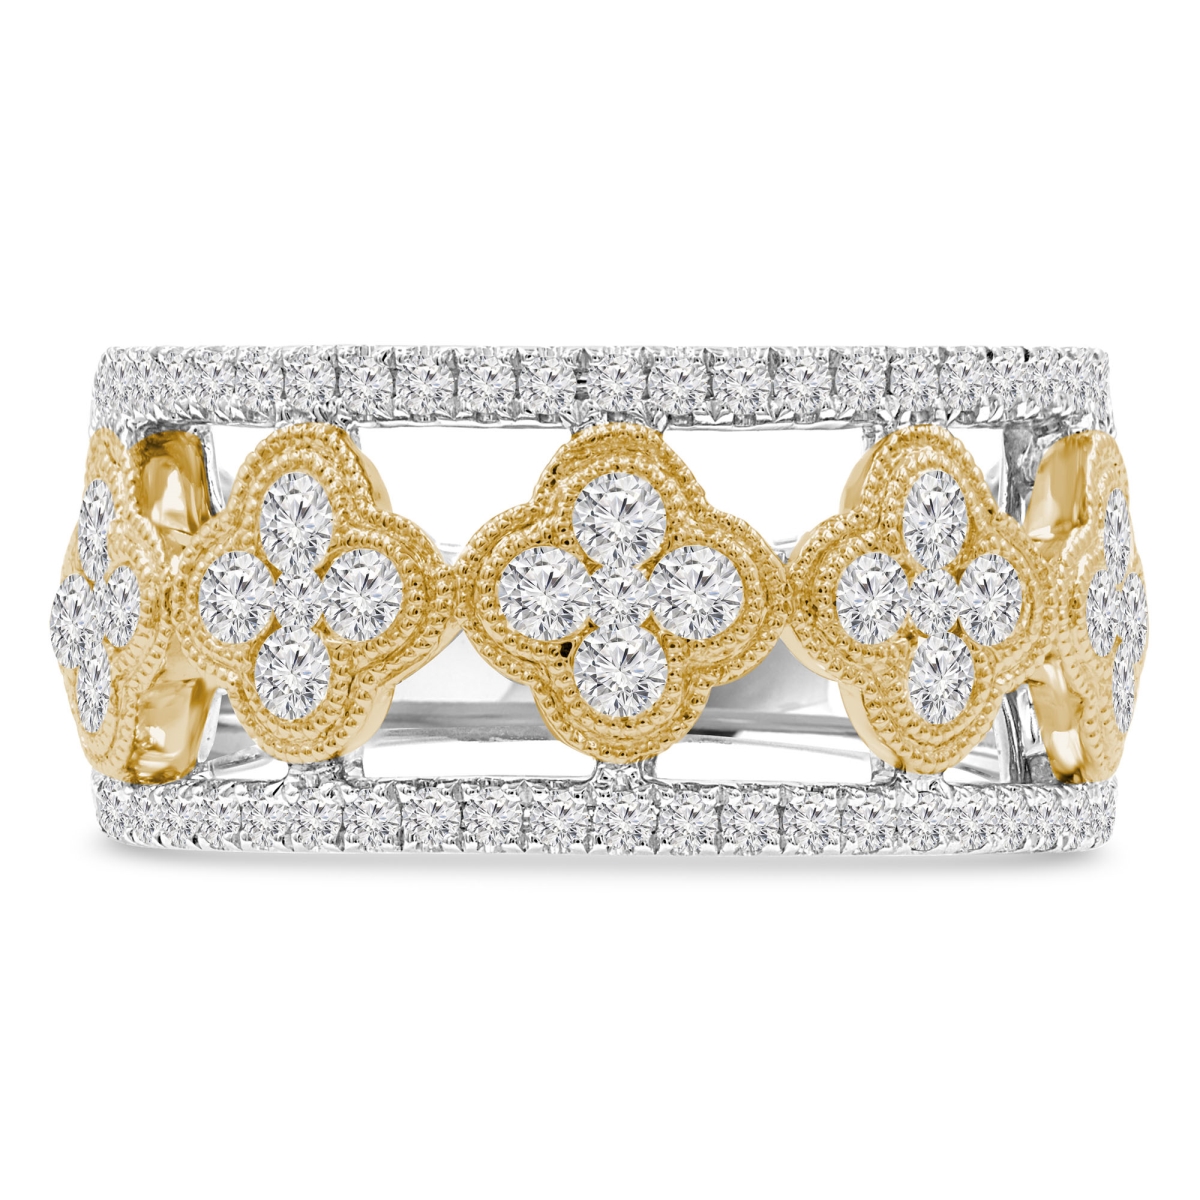 Picture of Majesty Diamonds MDR210140-9 1 CTW Round Diamond Cocktail Ring in 14K Two-Tone Gold - Size 9